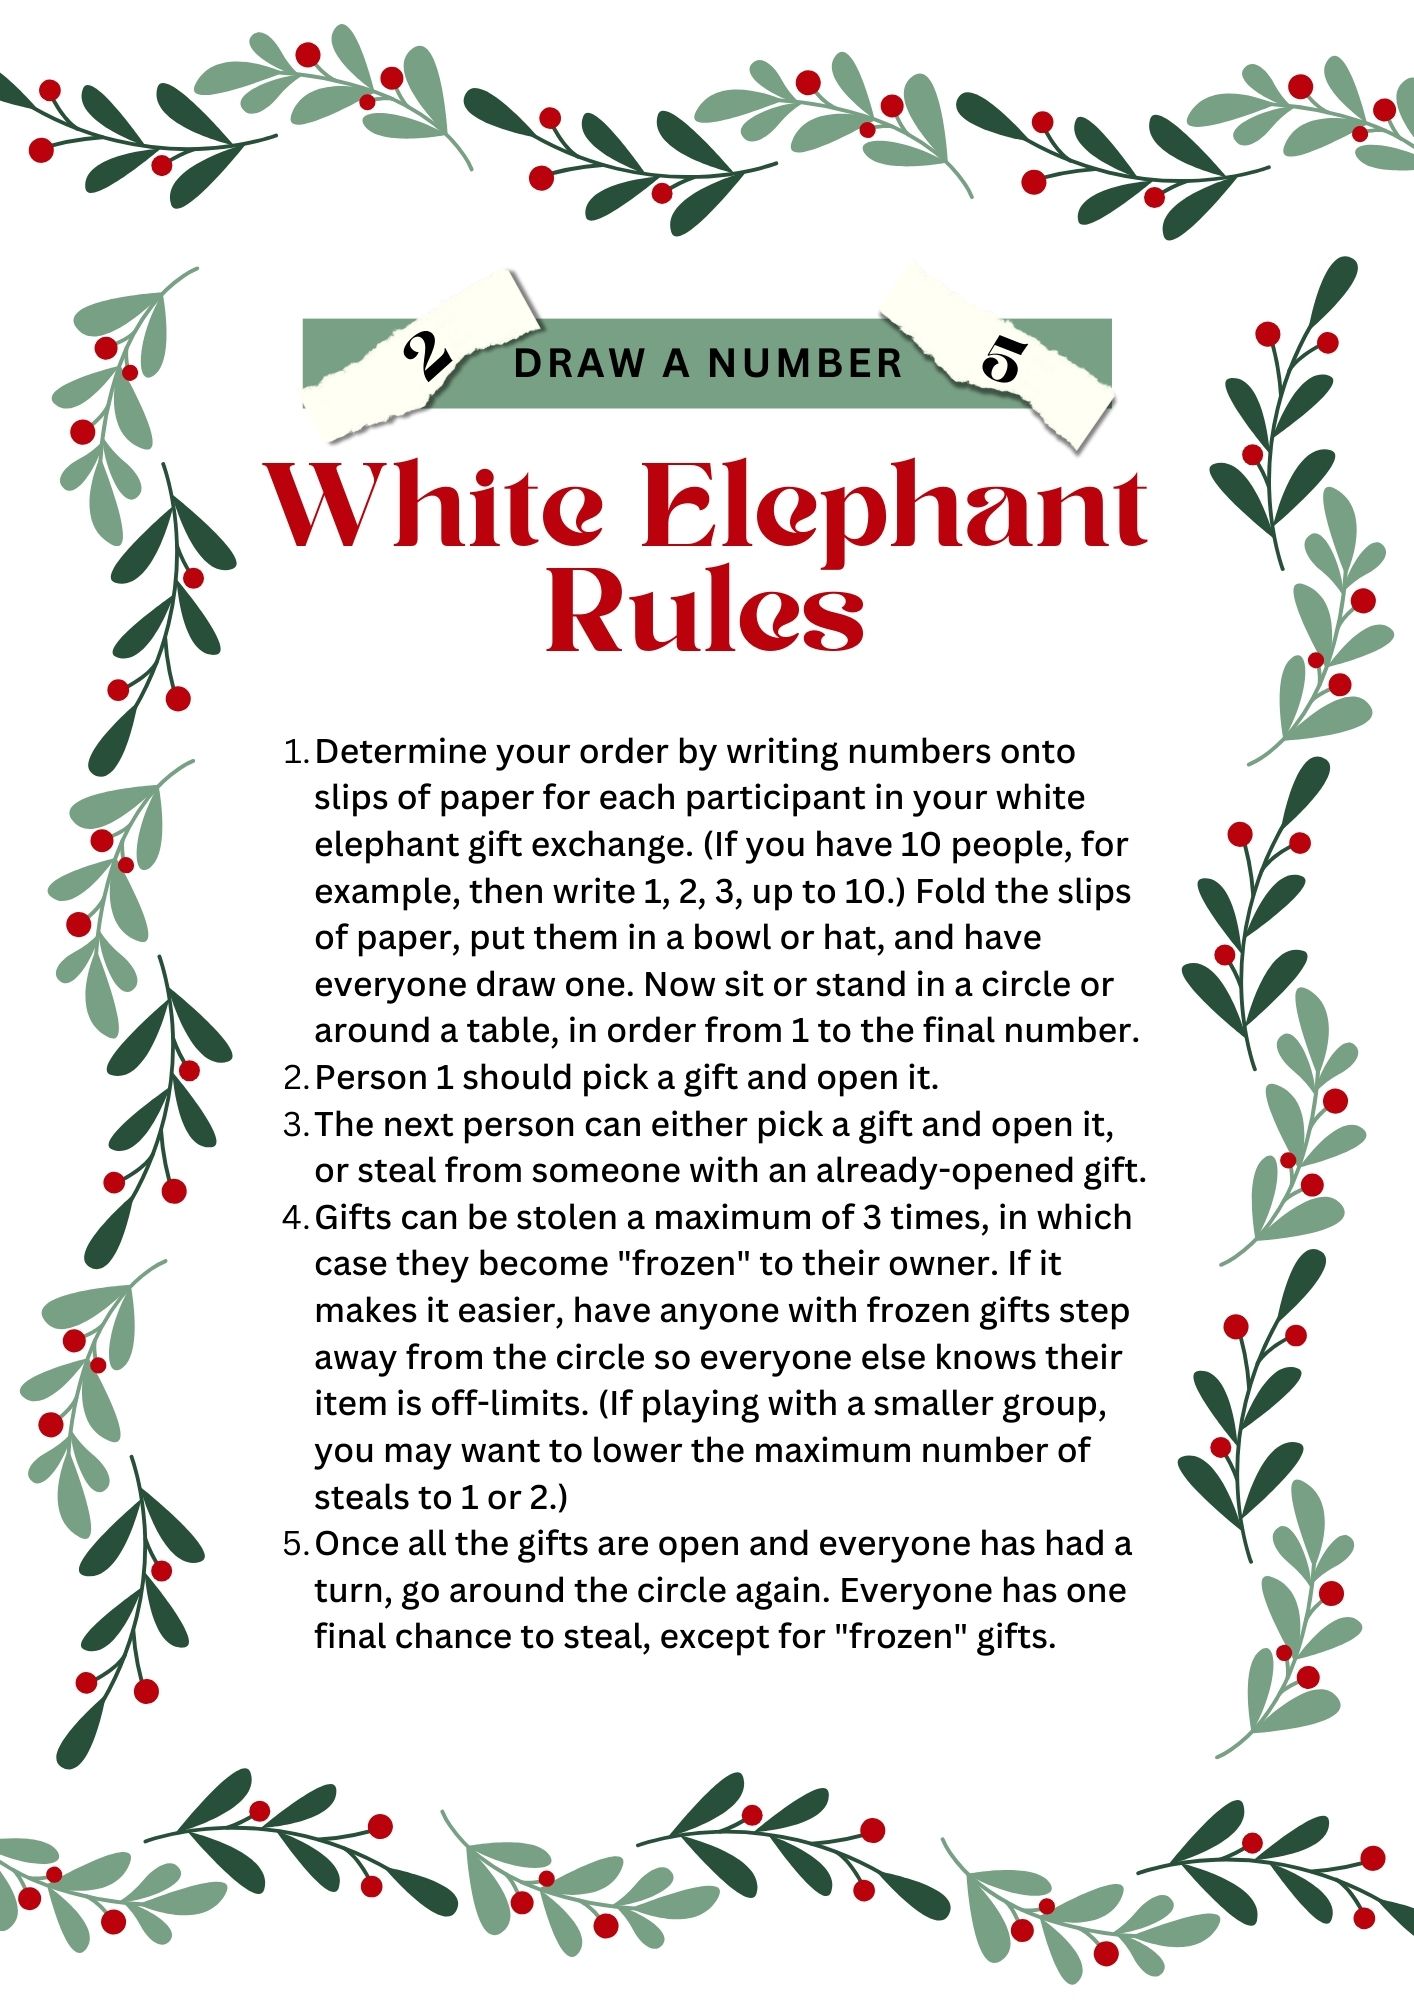 Buy Squirrel Products White Elephant Party Kit Swappy The Chrsitmas Party  Game The Most Fun You Can Have Exchanging Useless Gifts for The Holidays  Online at Low Prices in India - Amazon.in